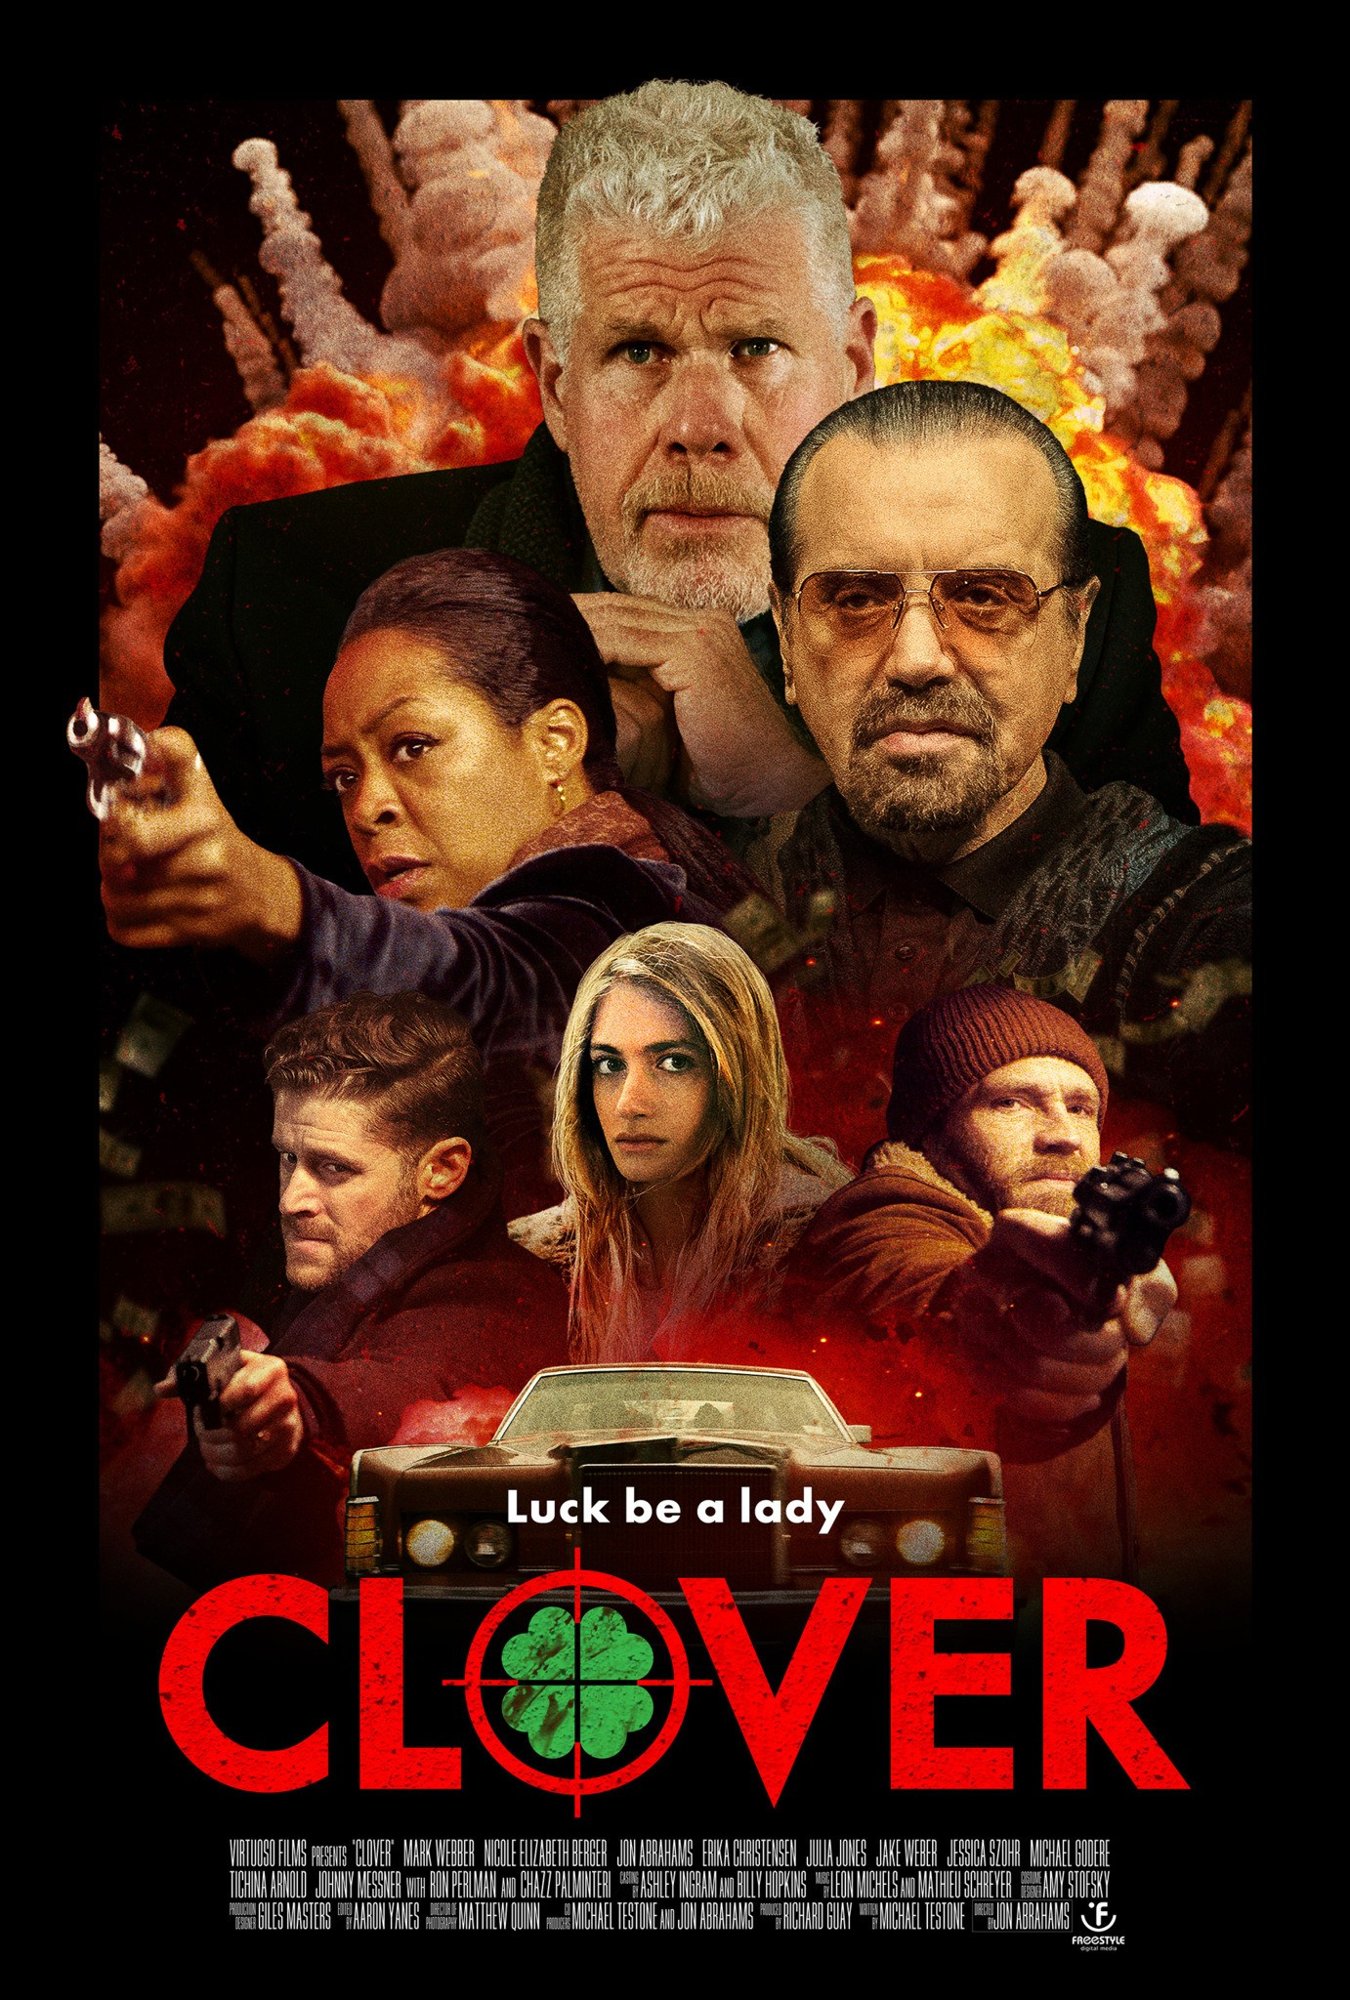 Poster of Freestyle Digital Media's Clover (2020)